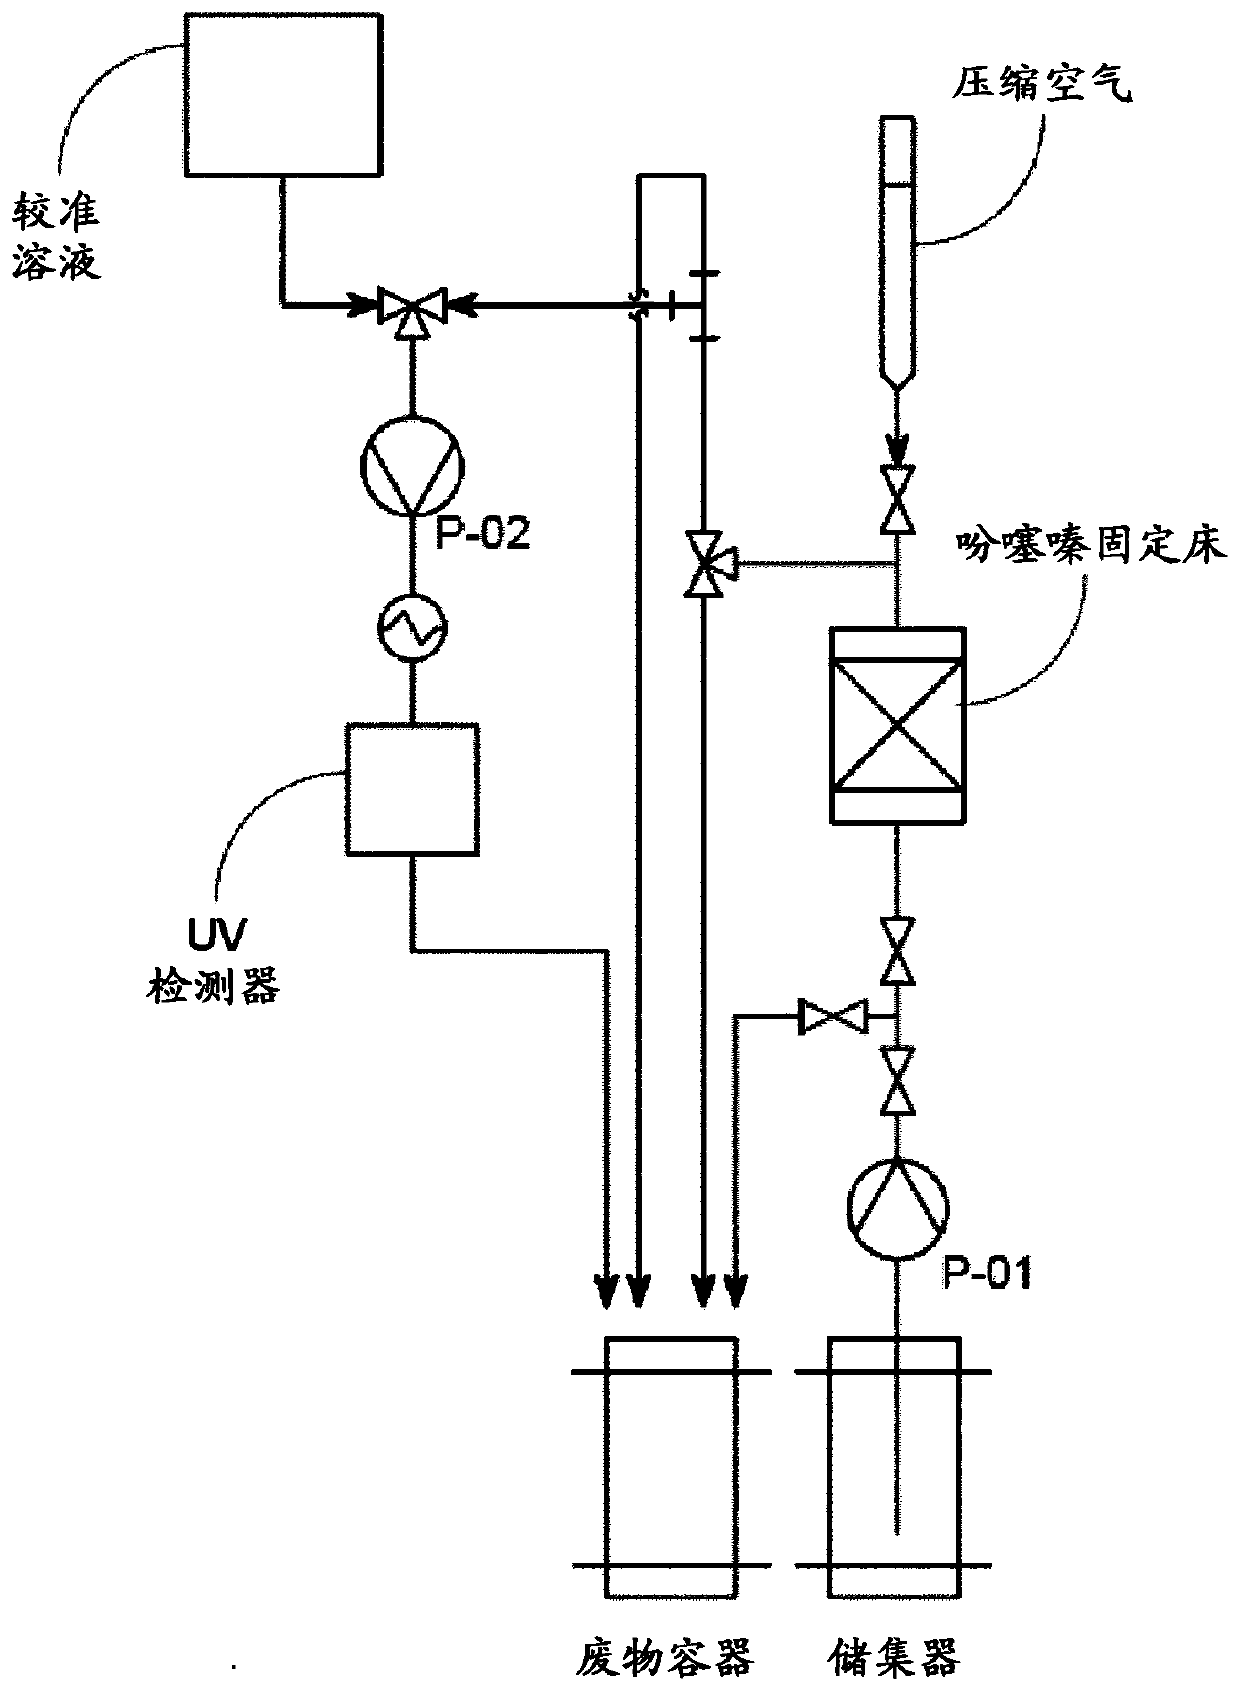 Process for continuous dissolution of a solid in a reaction medium